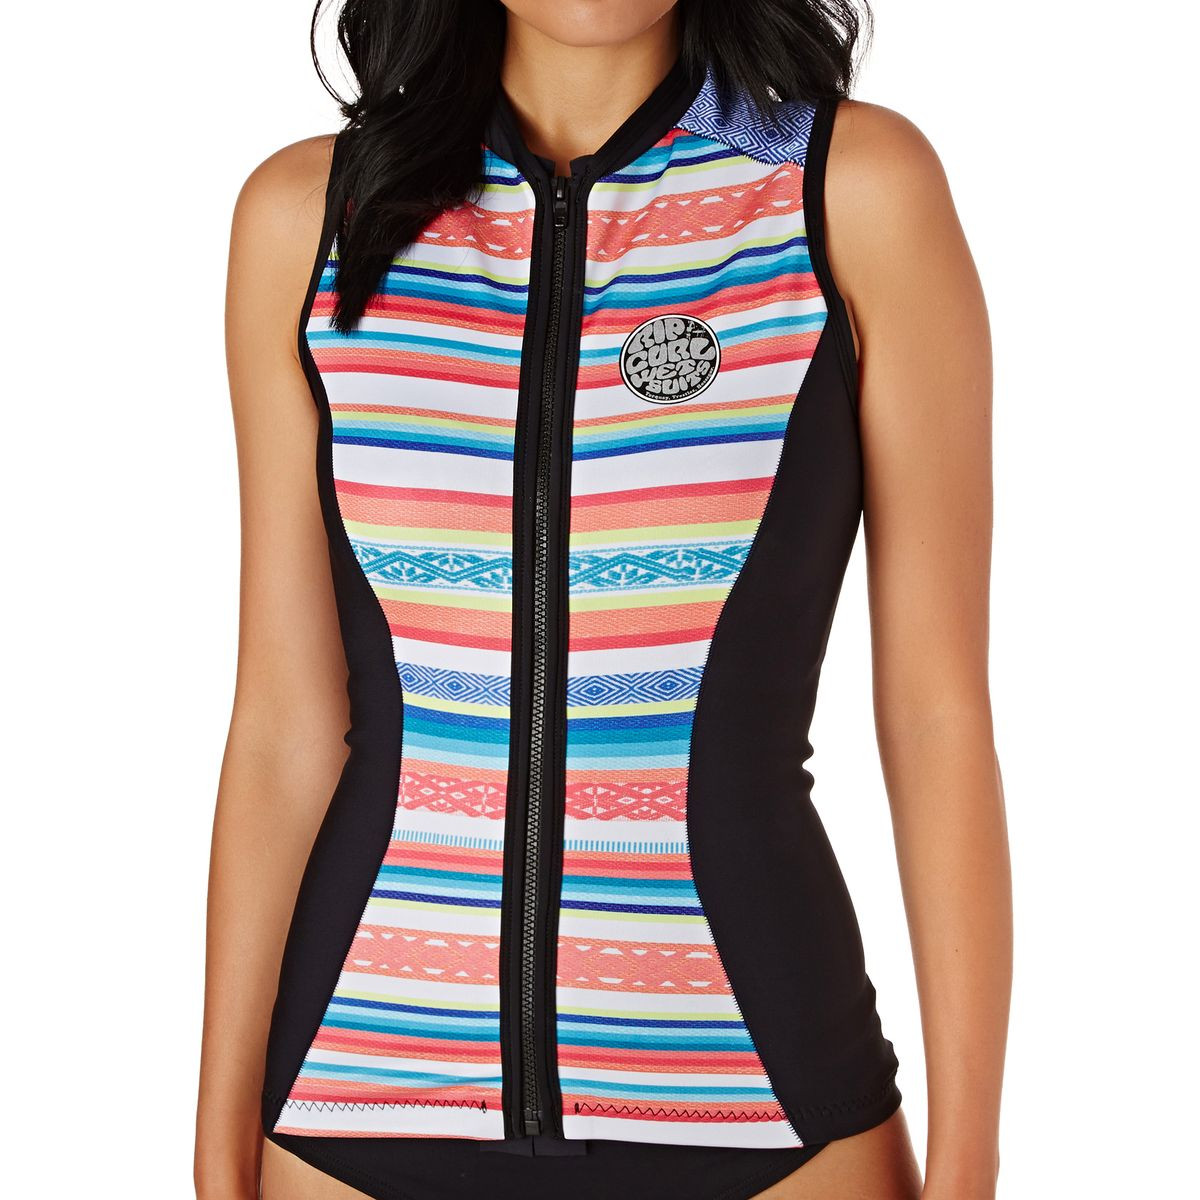 Rip Curl Womens G-Bomb 1mm 2017 Front Zip Sleeveless Wetsuit Jacket - Stripe